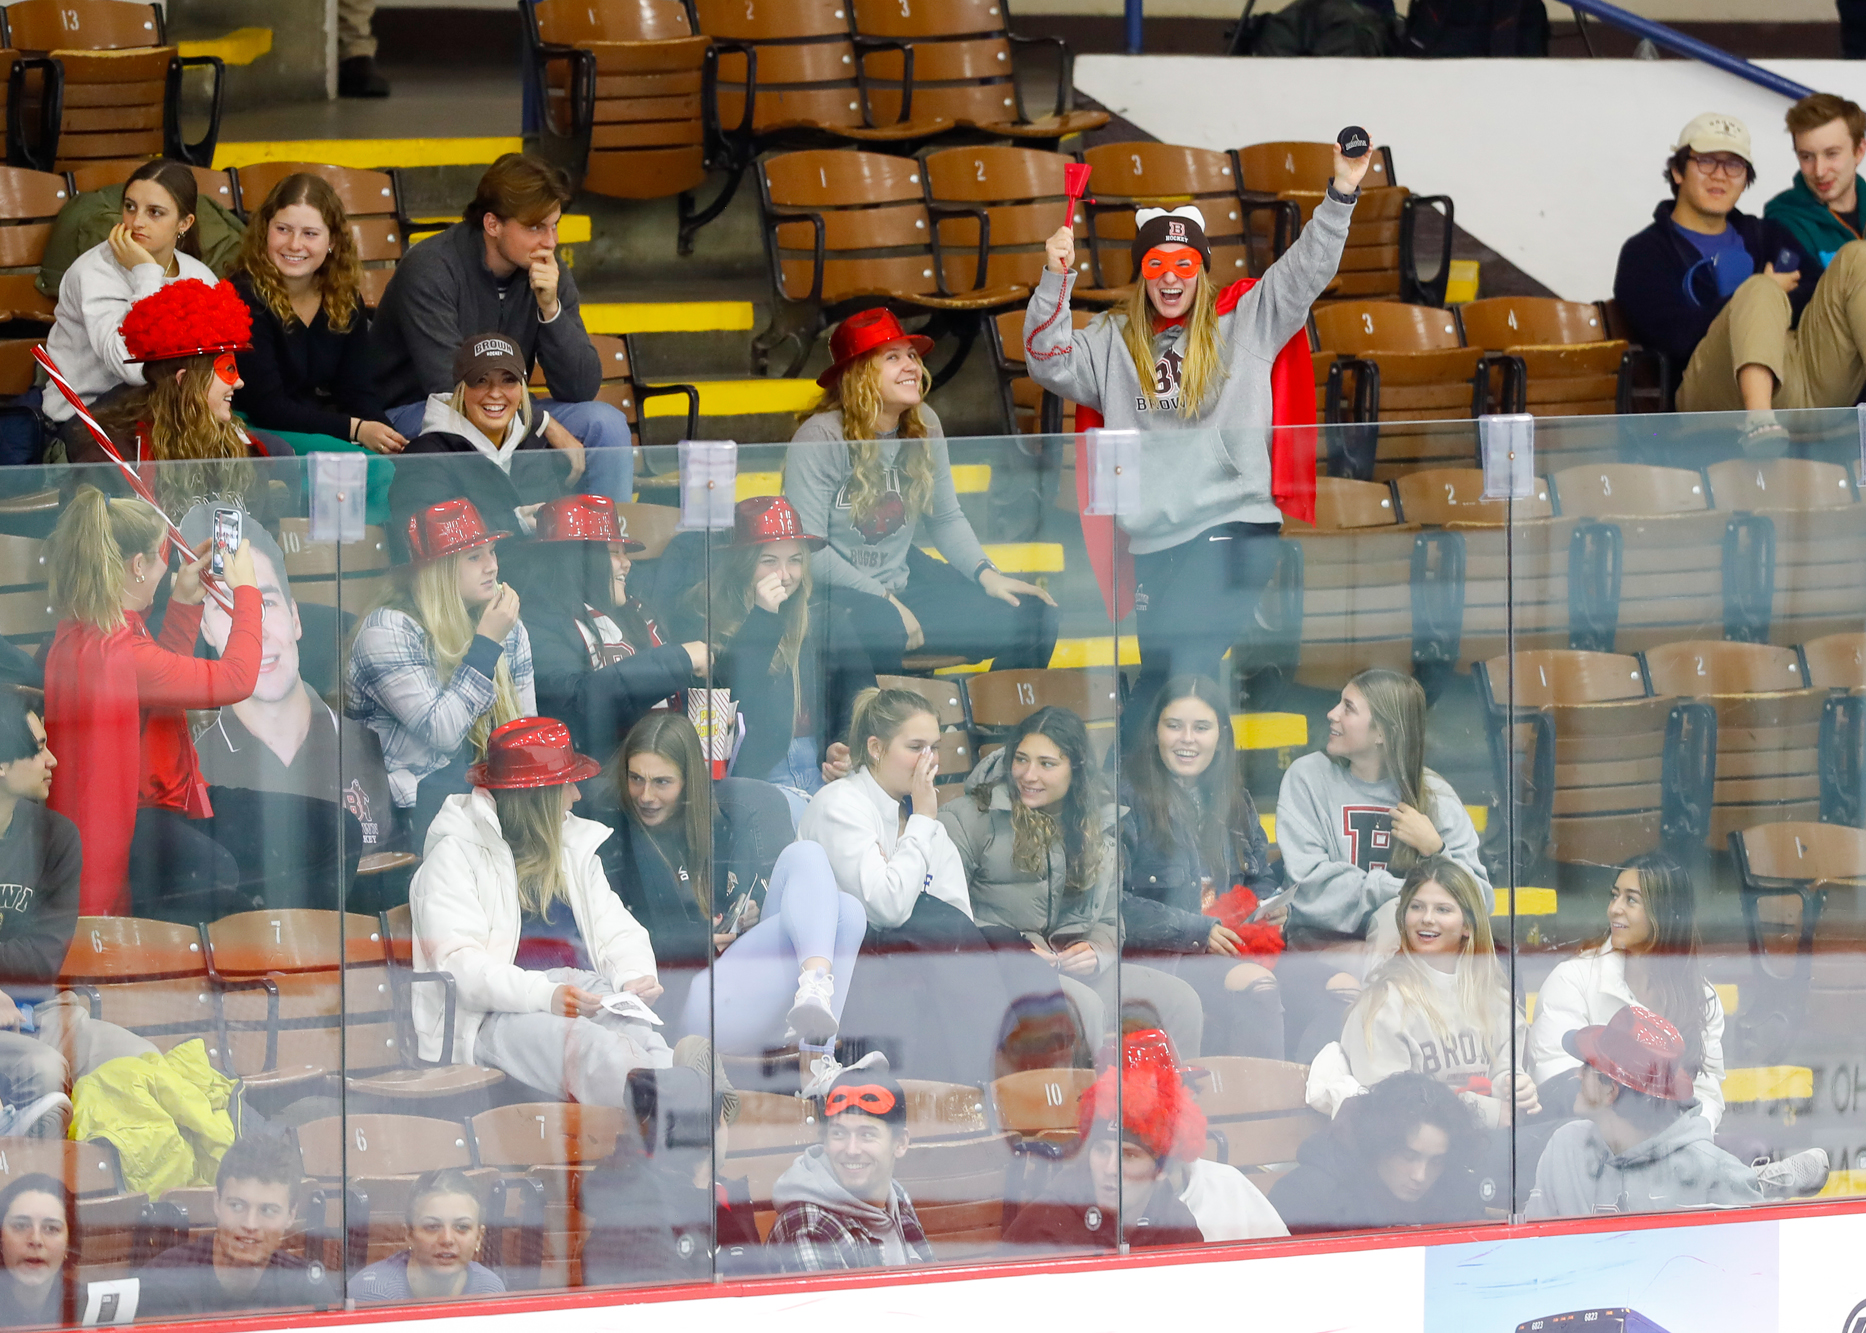 hype squad at hockey game